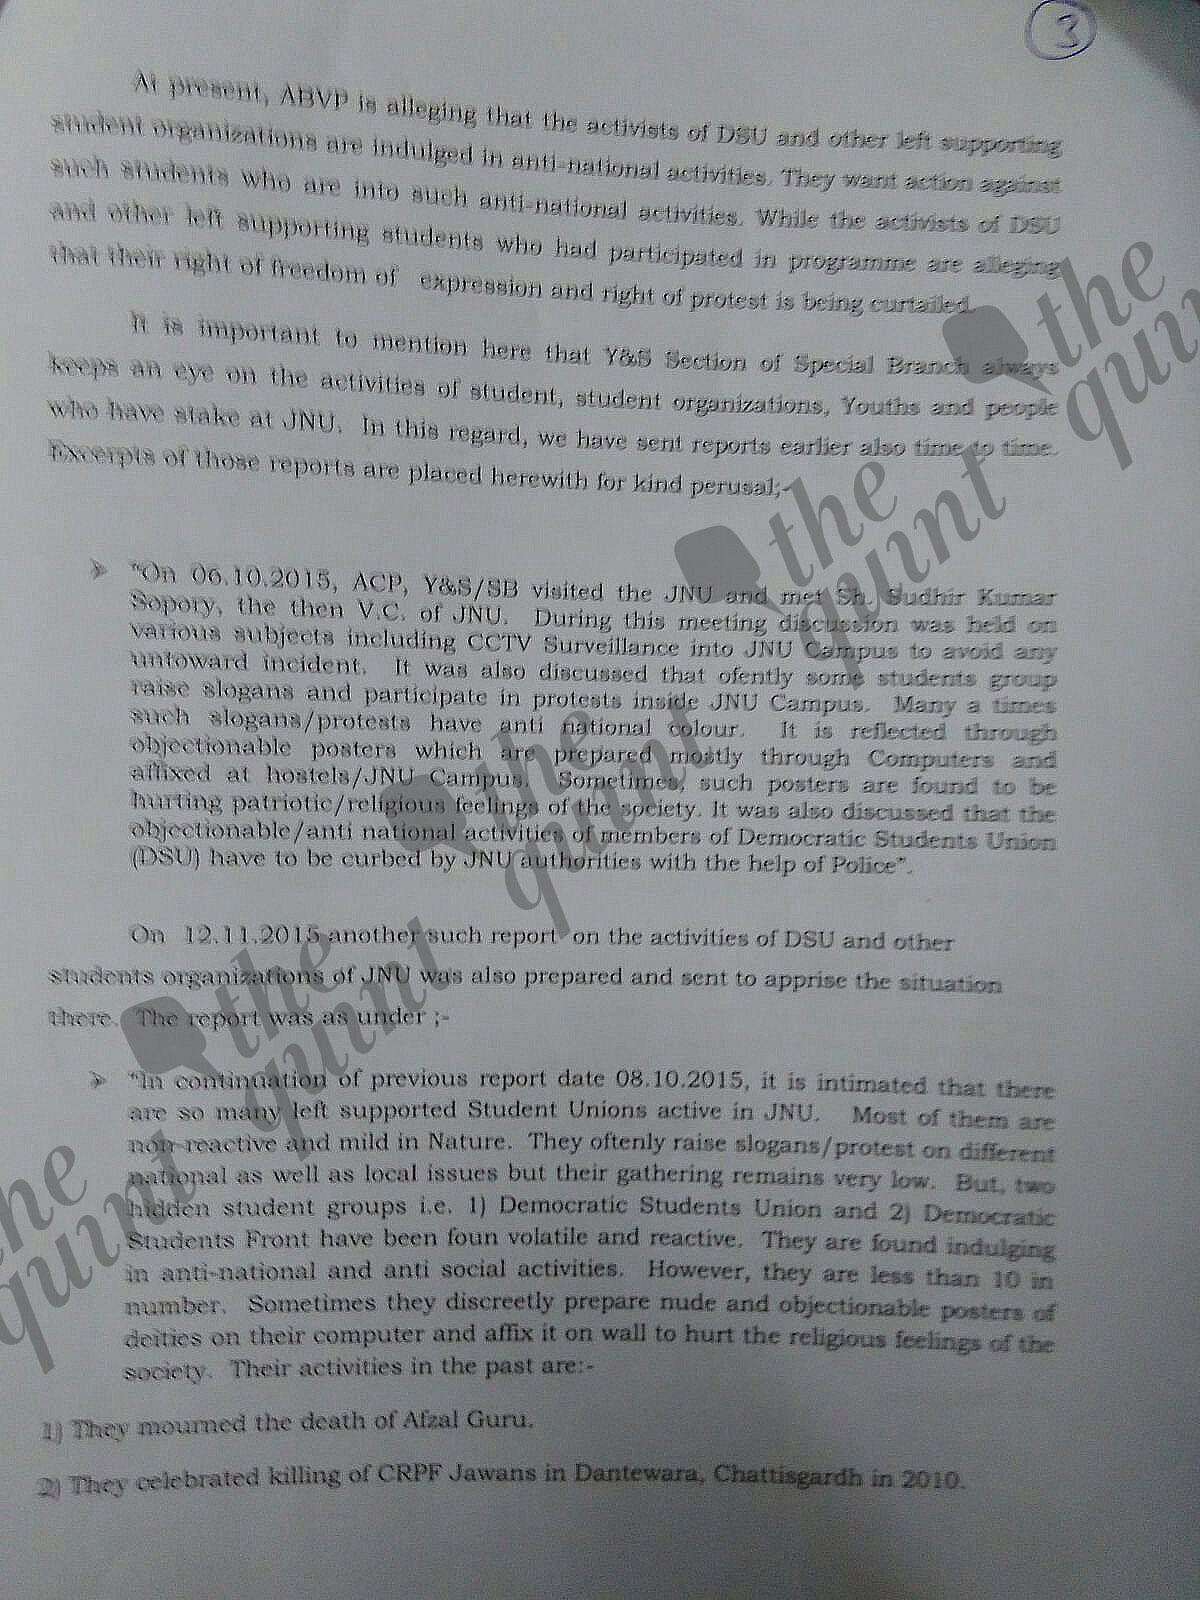 

The report details the sequence of events during and around the JNU incident. 